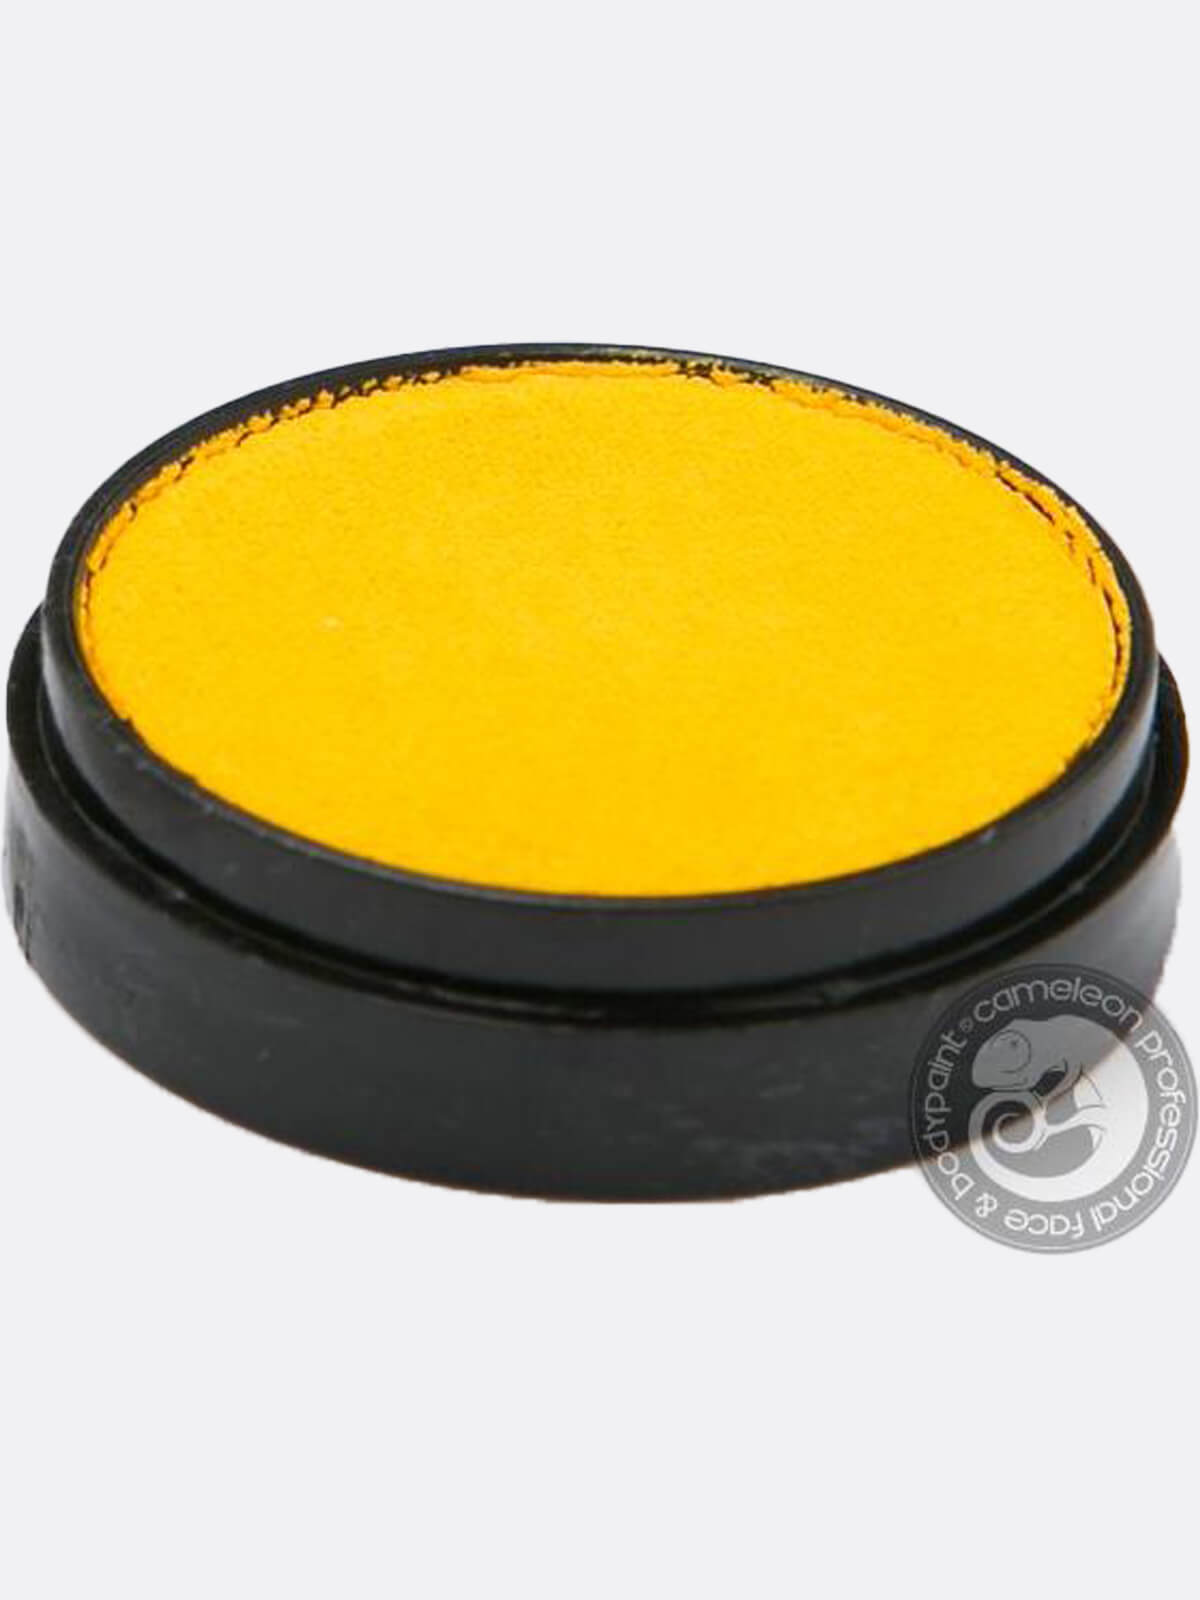 Banana Yellow Face Paint by Cameleon